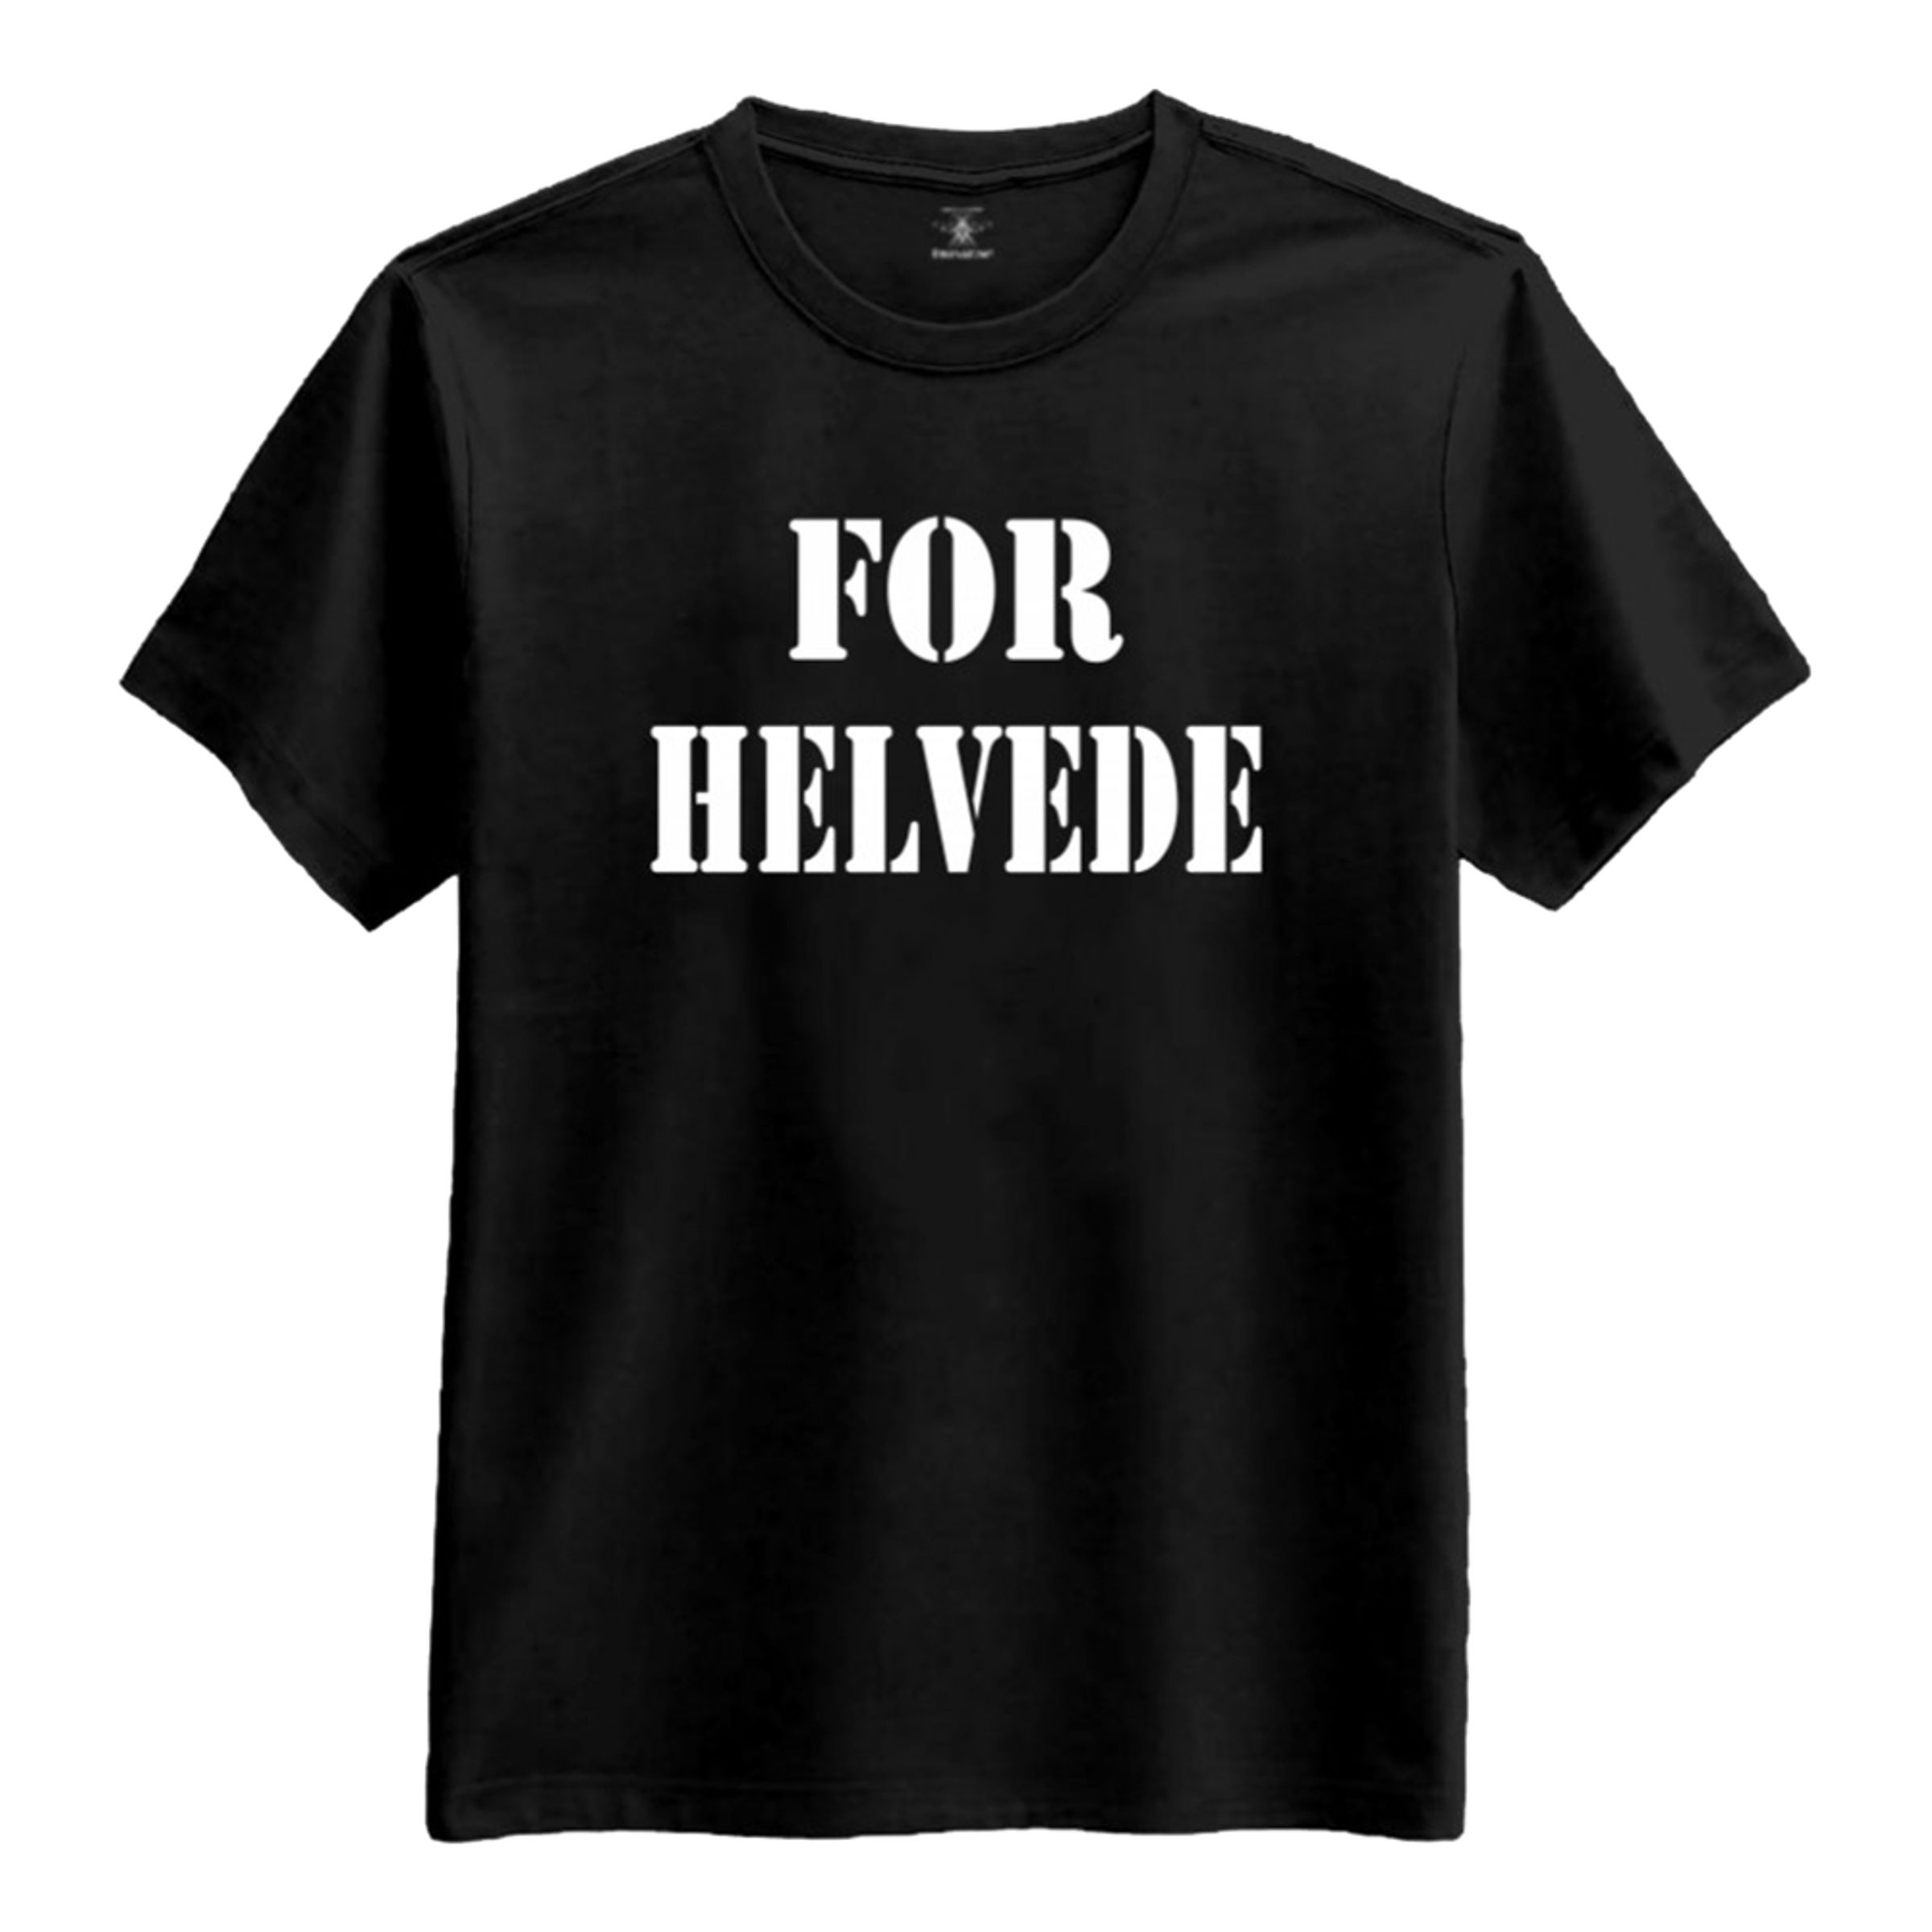 For Helvede T-shirt - XX-Large